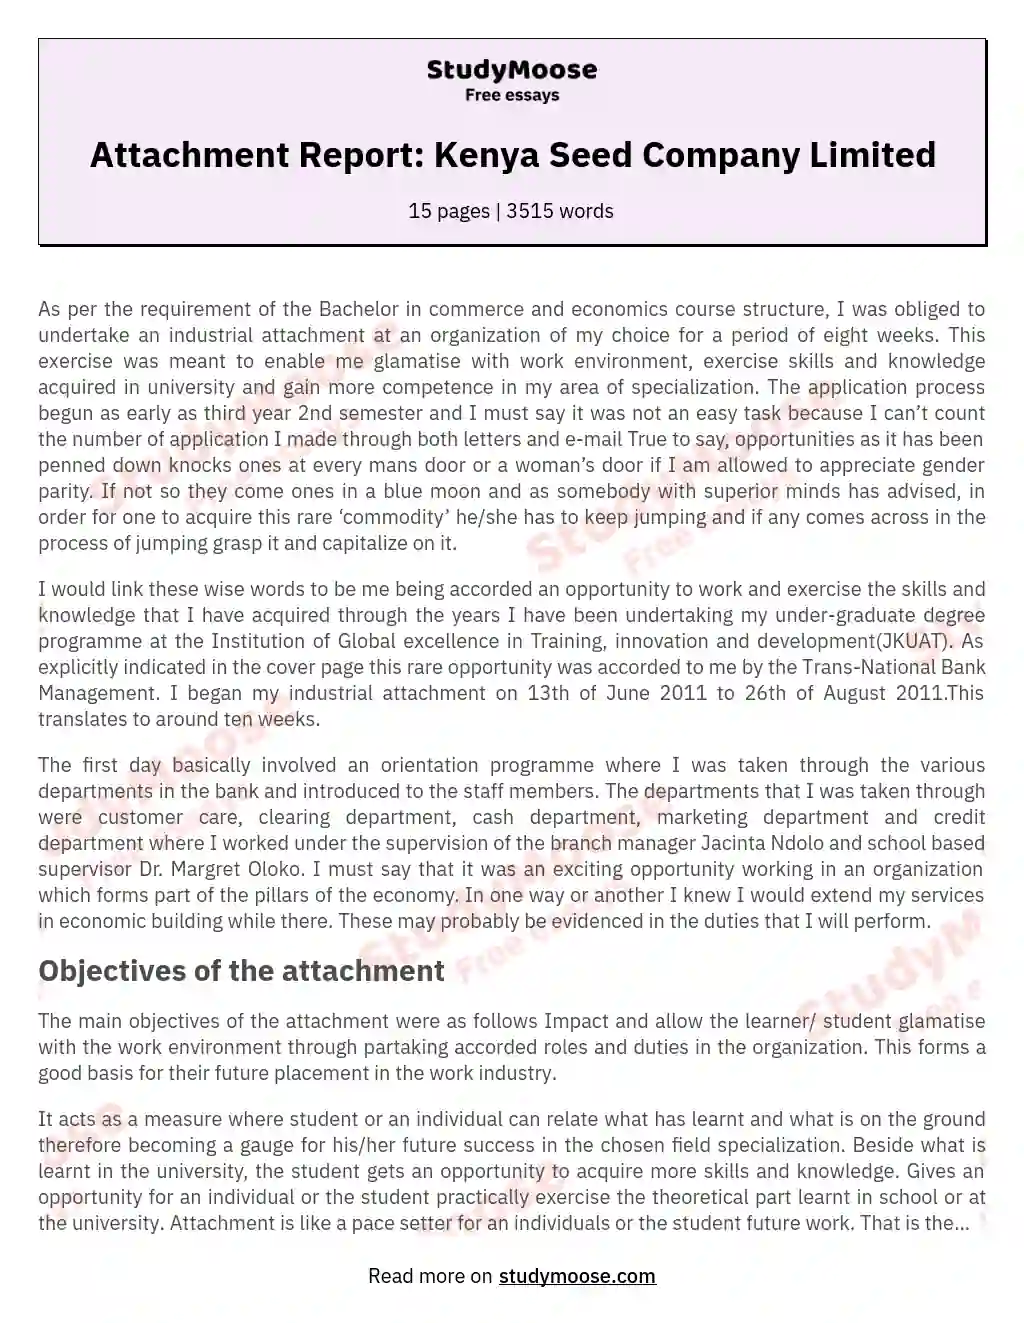 Attachment Report: Kenya Seed Company Limited essay